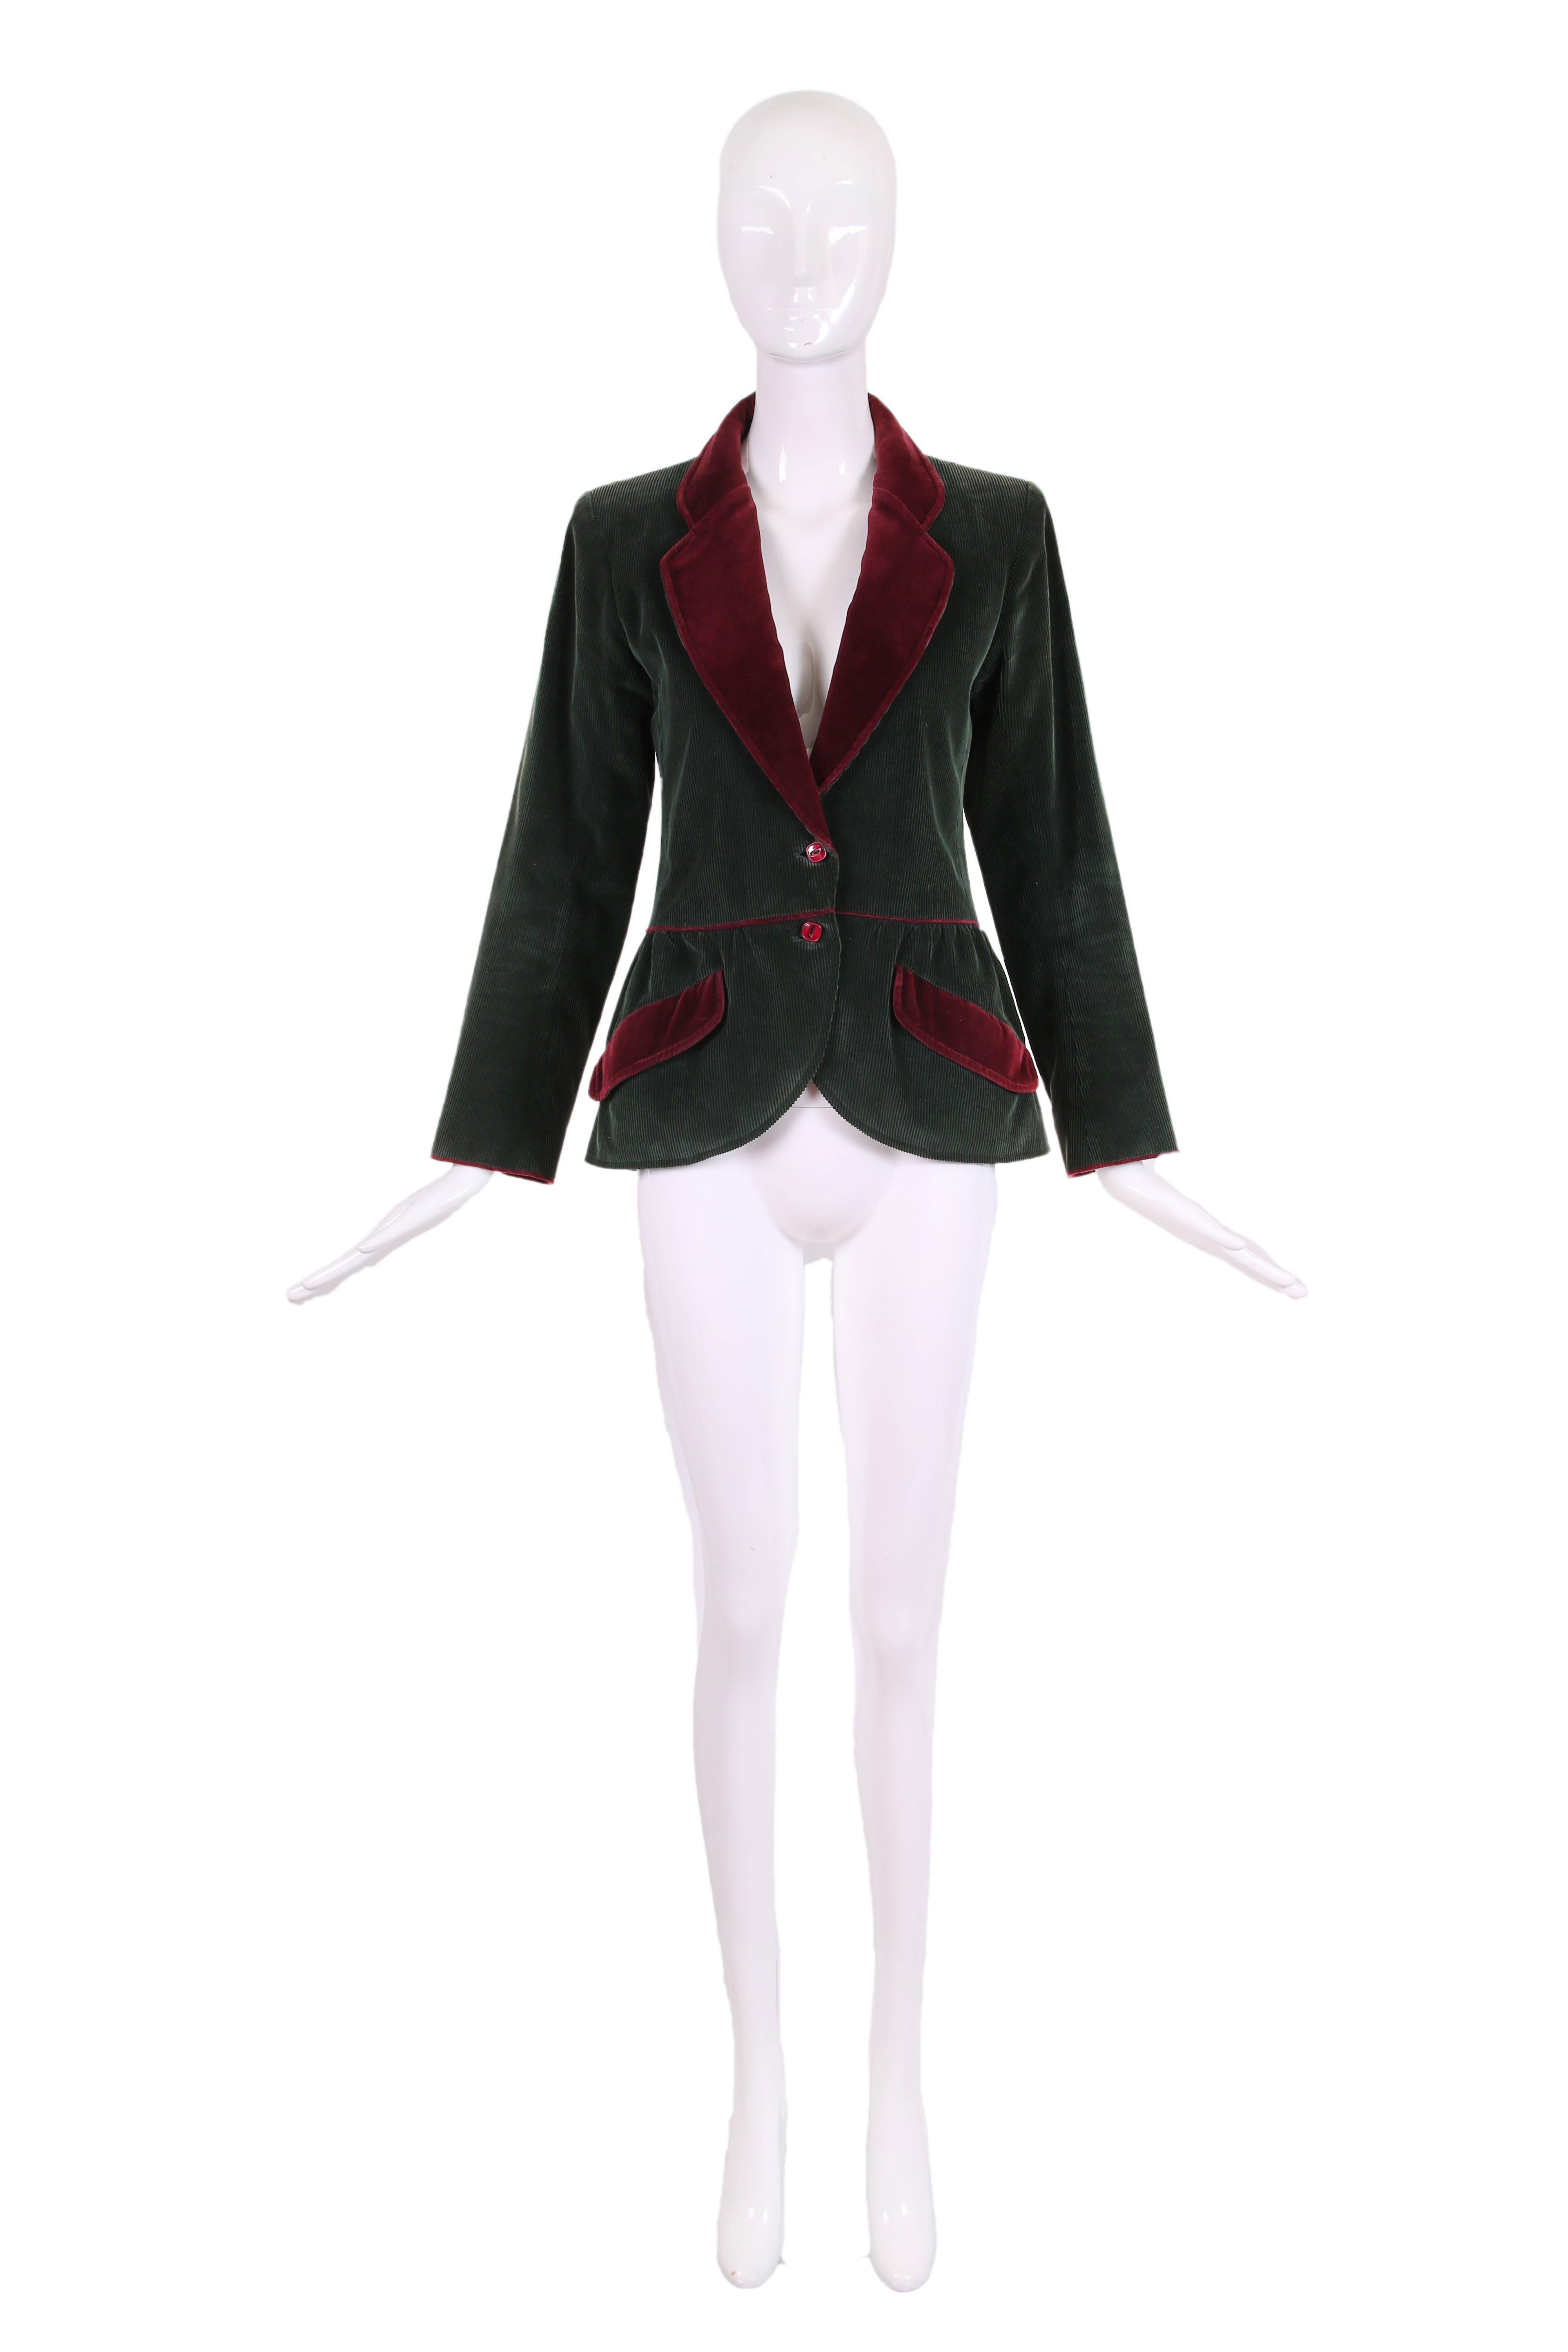 Yves Saint Laurent dark green long sleeve 100% cotton corduroy jacket with burgundy velvet trim and peplum waist. Features two frontal slanted pockets, burgundy button closures at waist and cuff and is fully lined at the interior. In excellent